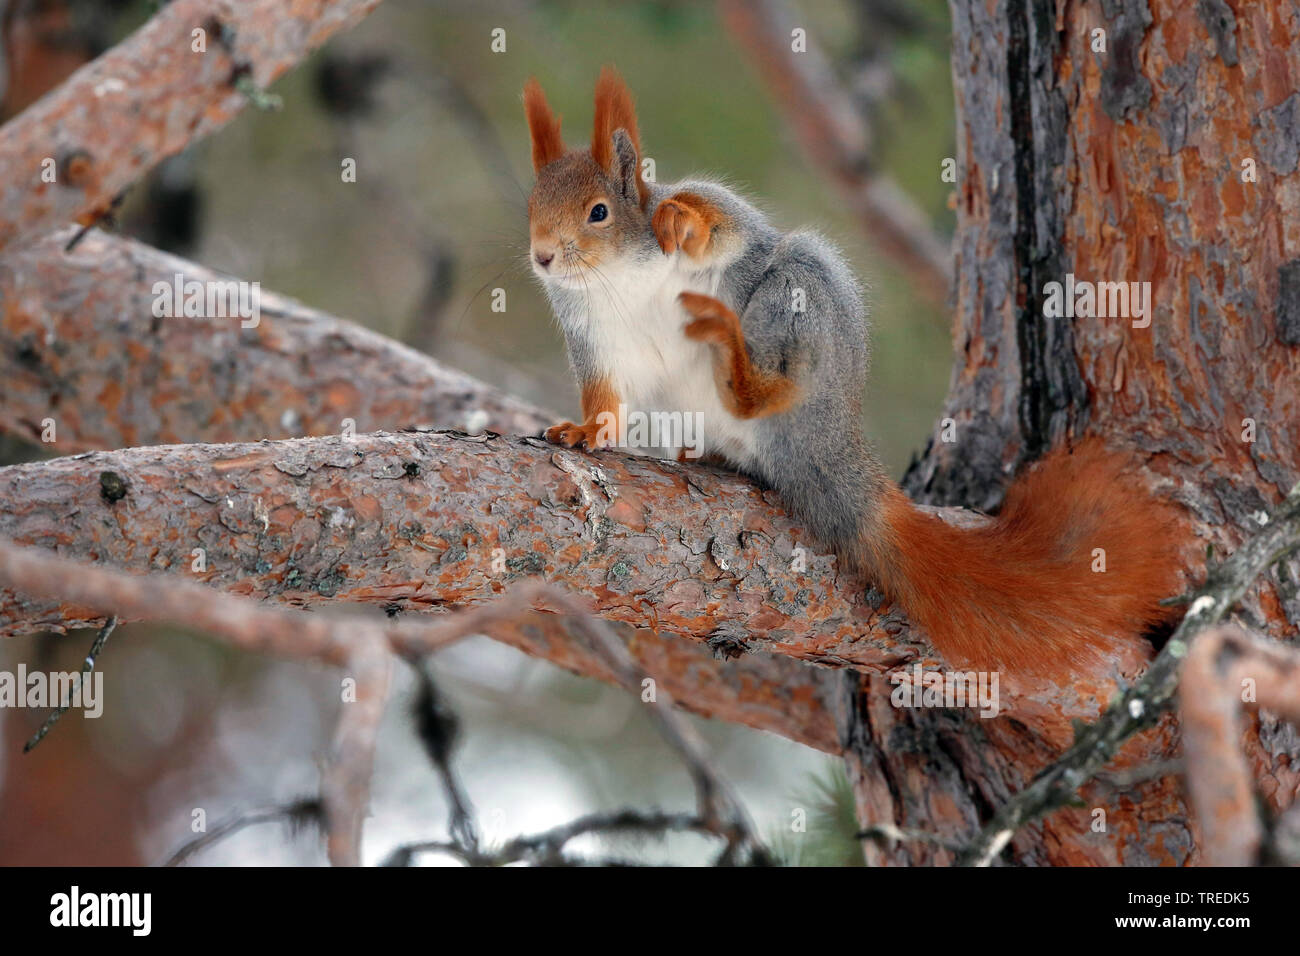 European red squirrel, Eurasian red squirrel (Sciurus vulgaris), sits on a branch on a tree and scratching, side view, Finland, Lapland Stock Photo